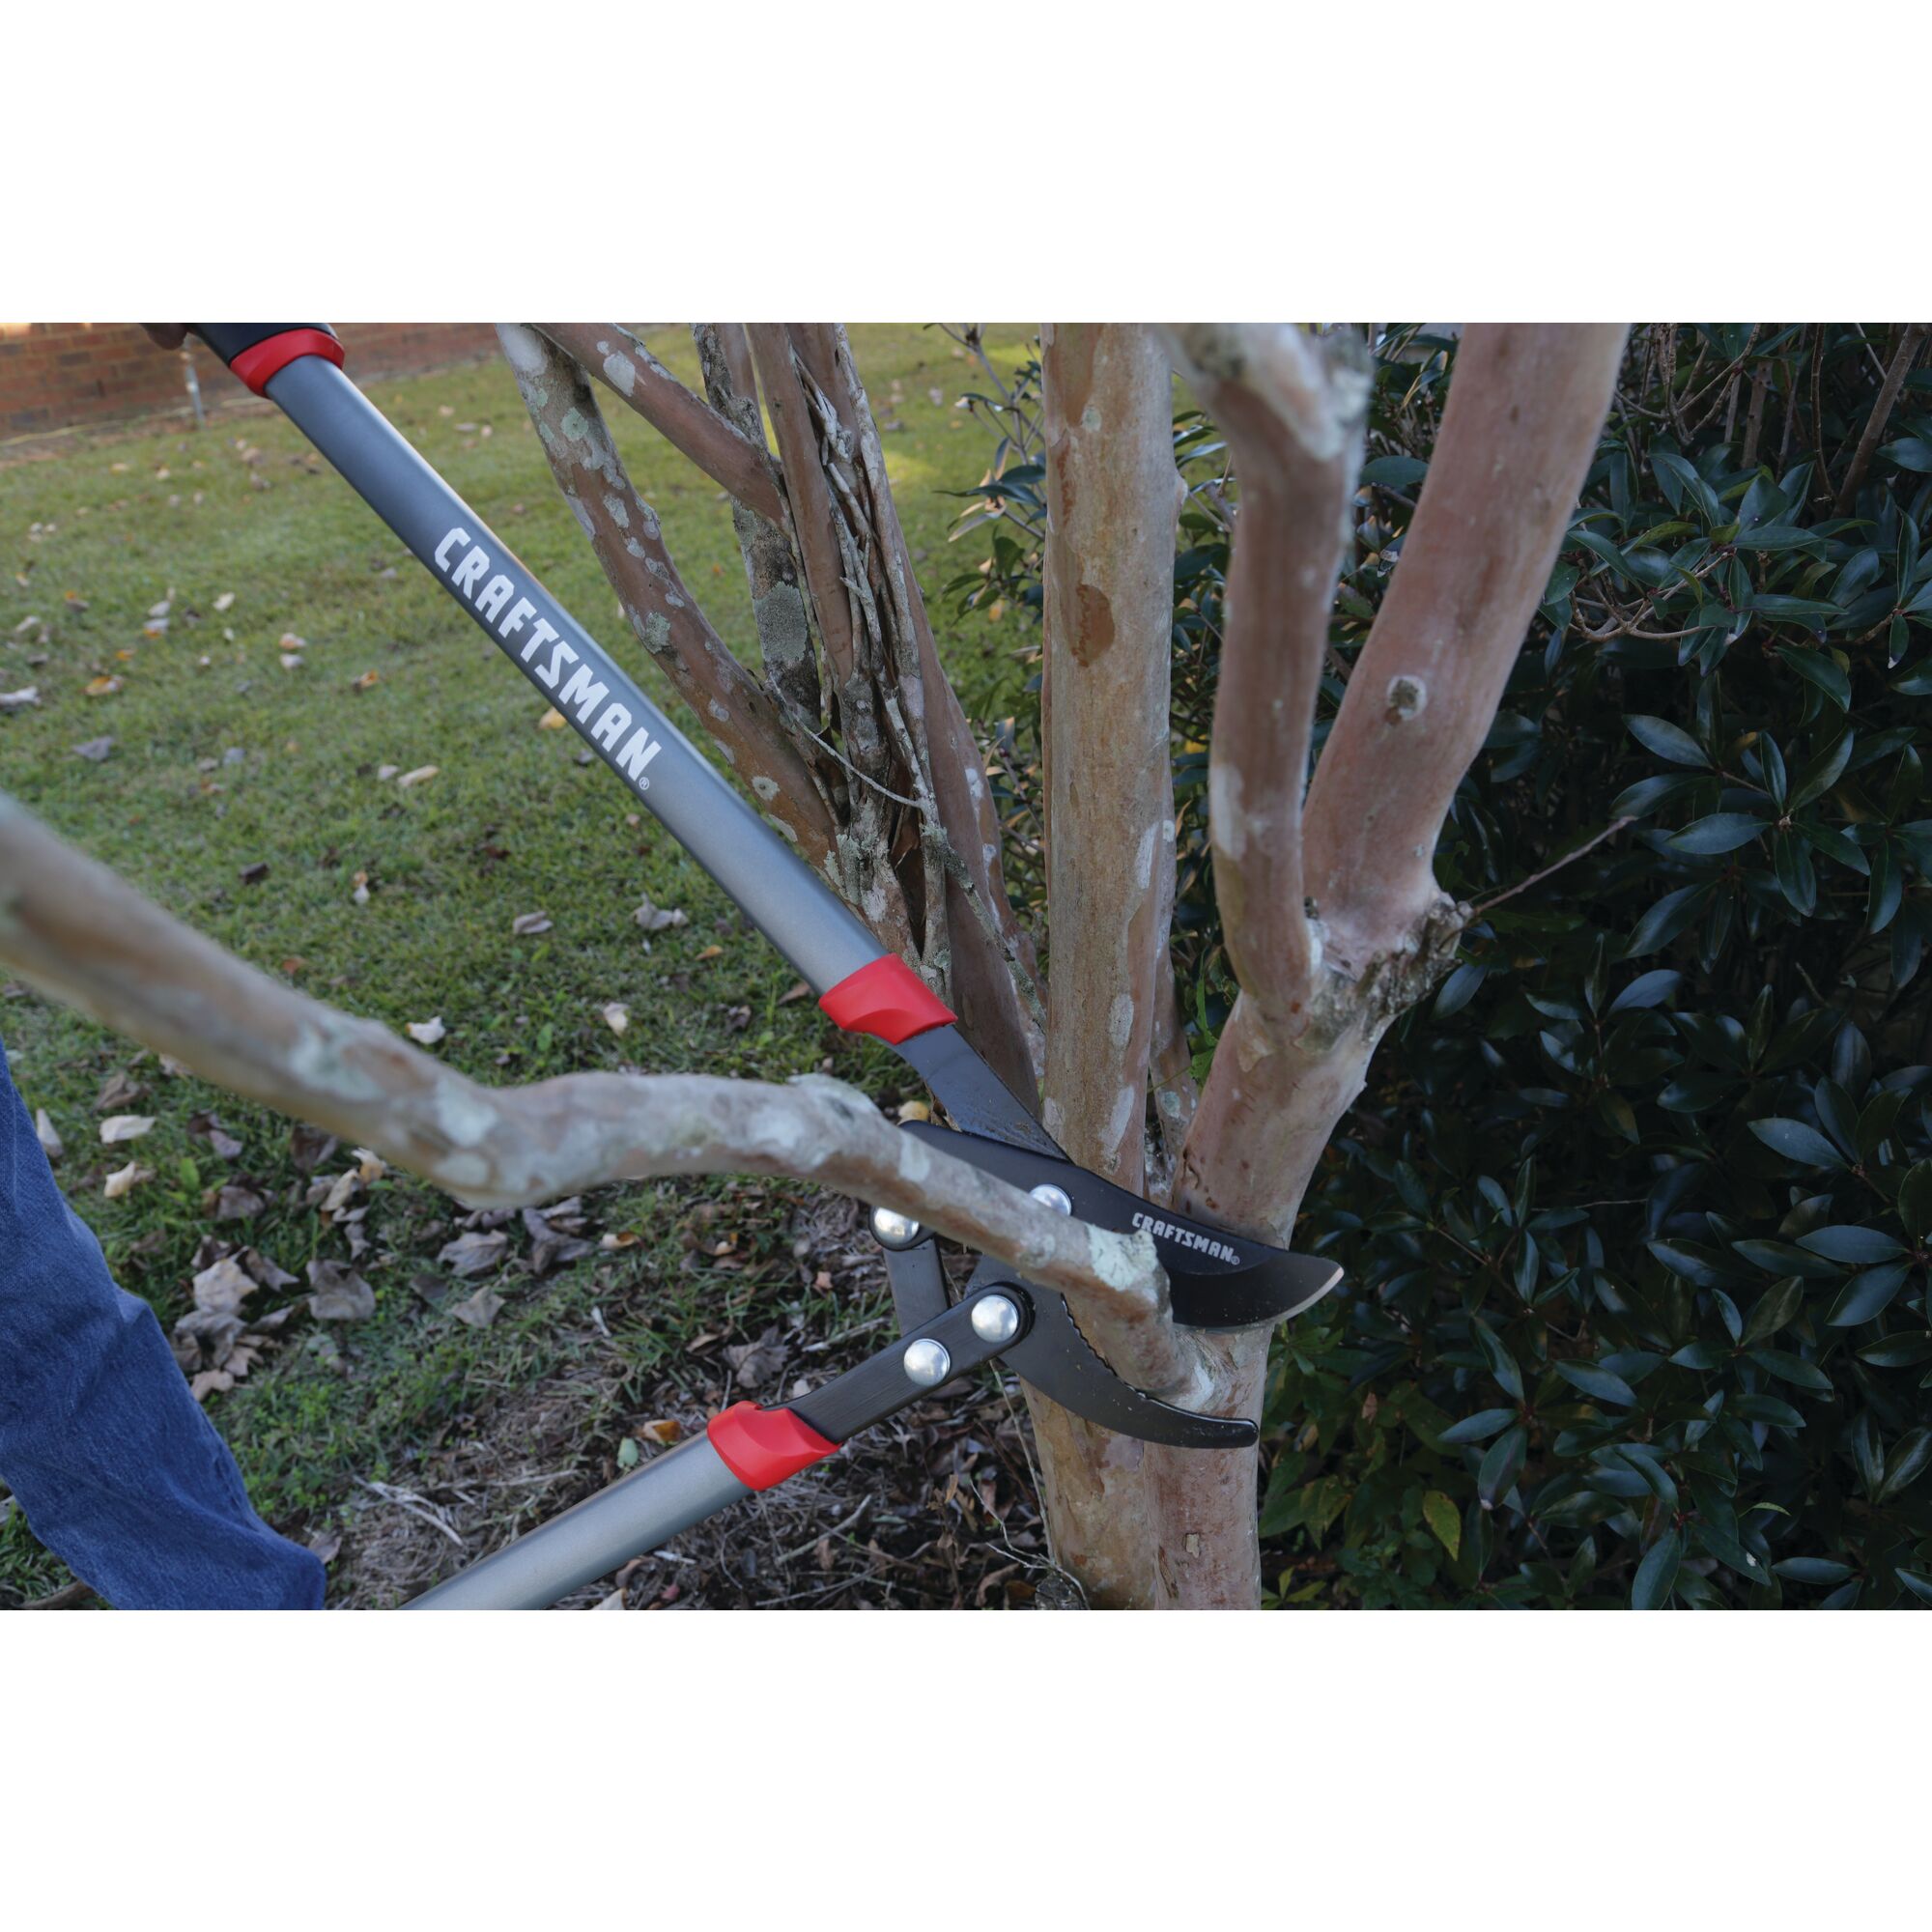 Compound bypass lopper being used by a person to cut a branch.